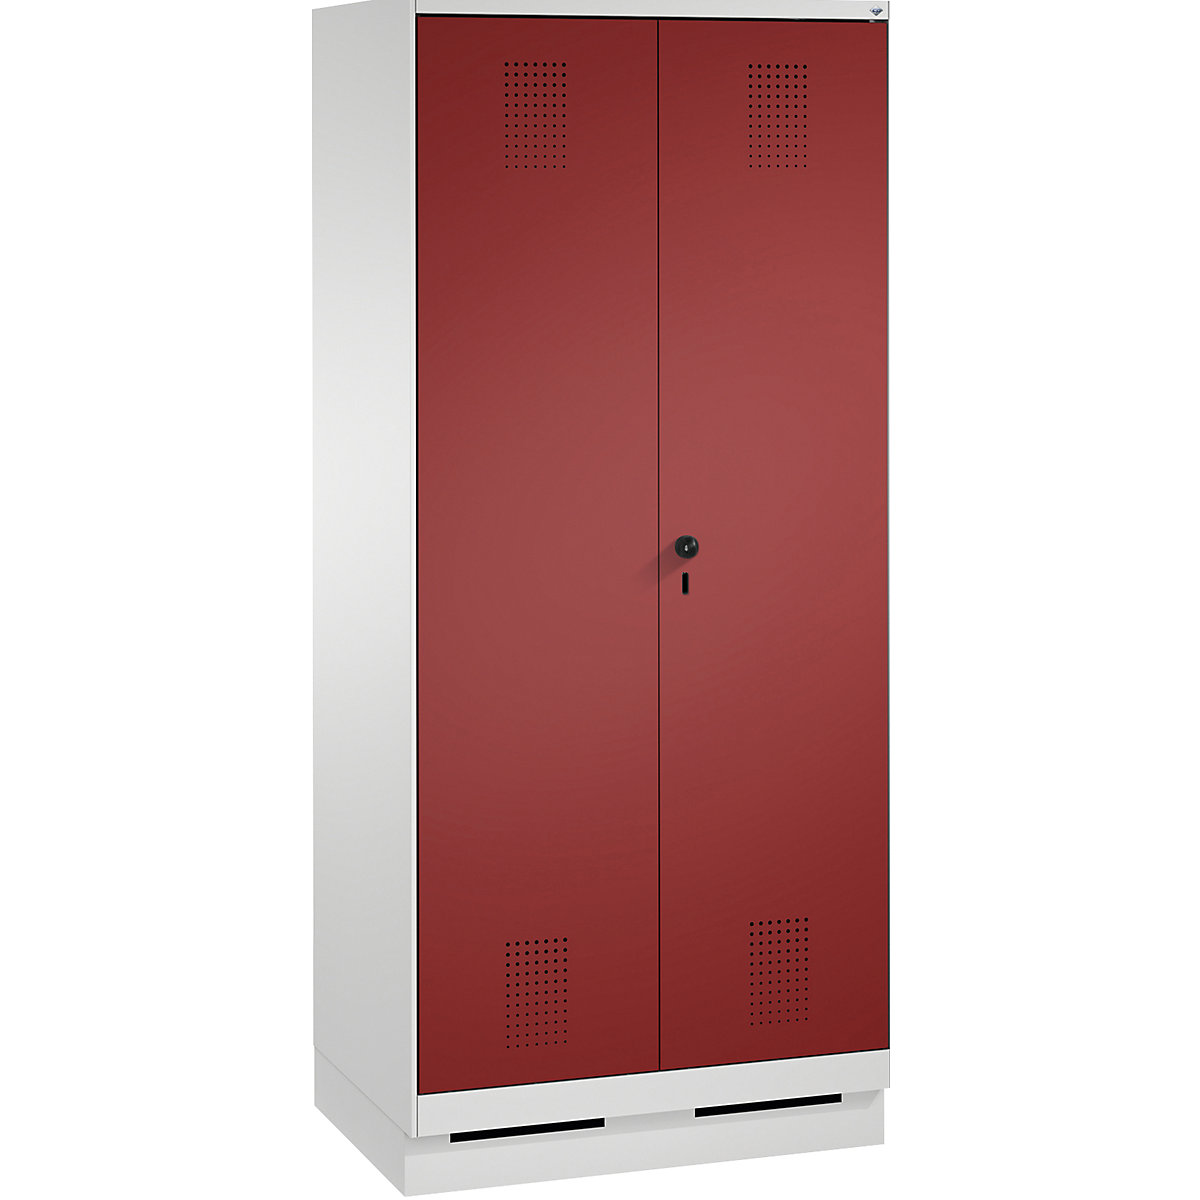 EVOLO laundry cupboard / cloakroom locker – C+P, 4 shelves, clothes rail, compartments 2 x 400 mm, with plinth, light grey / ruby red-17